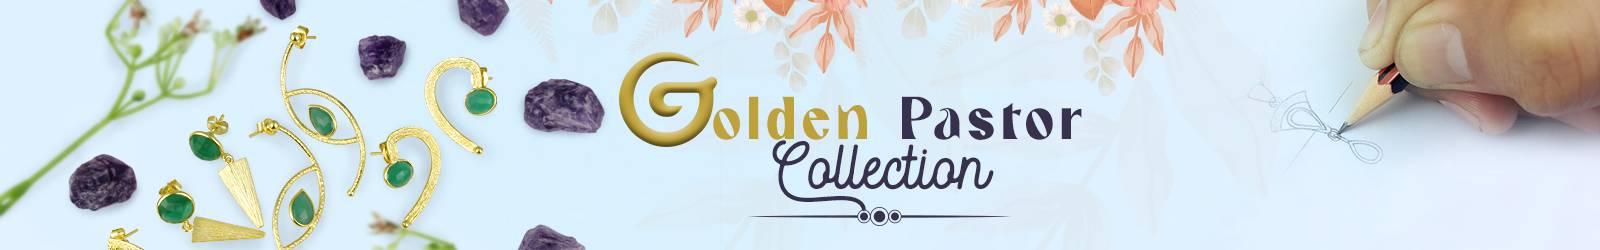 Golden Pastor Jewelry Collection